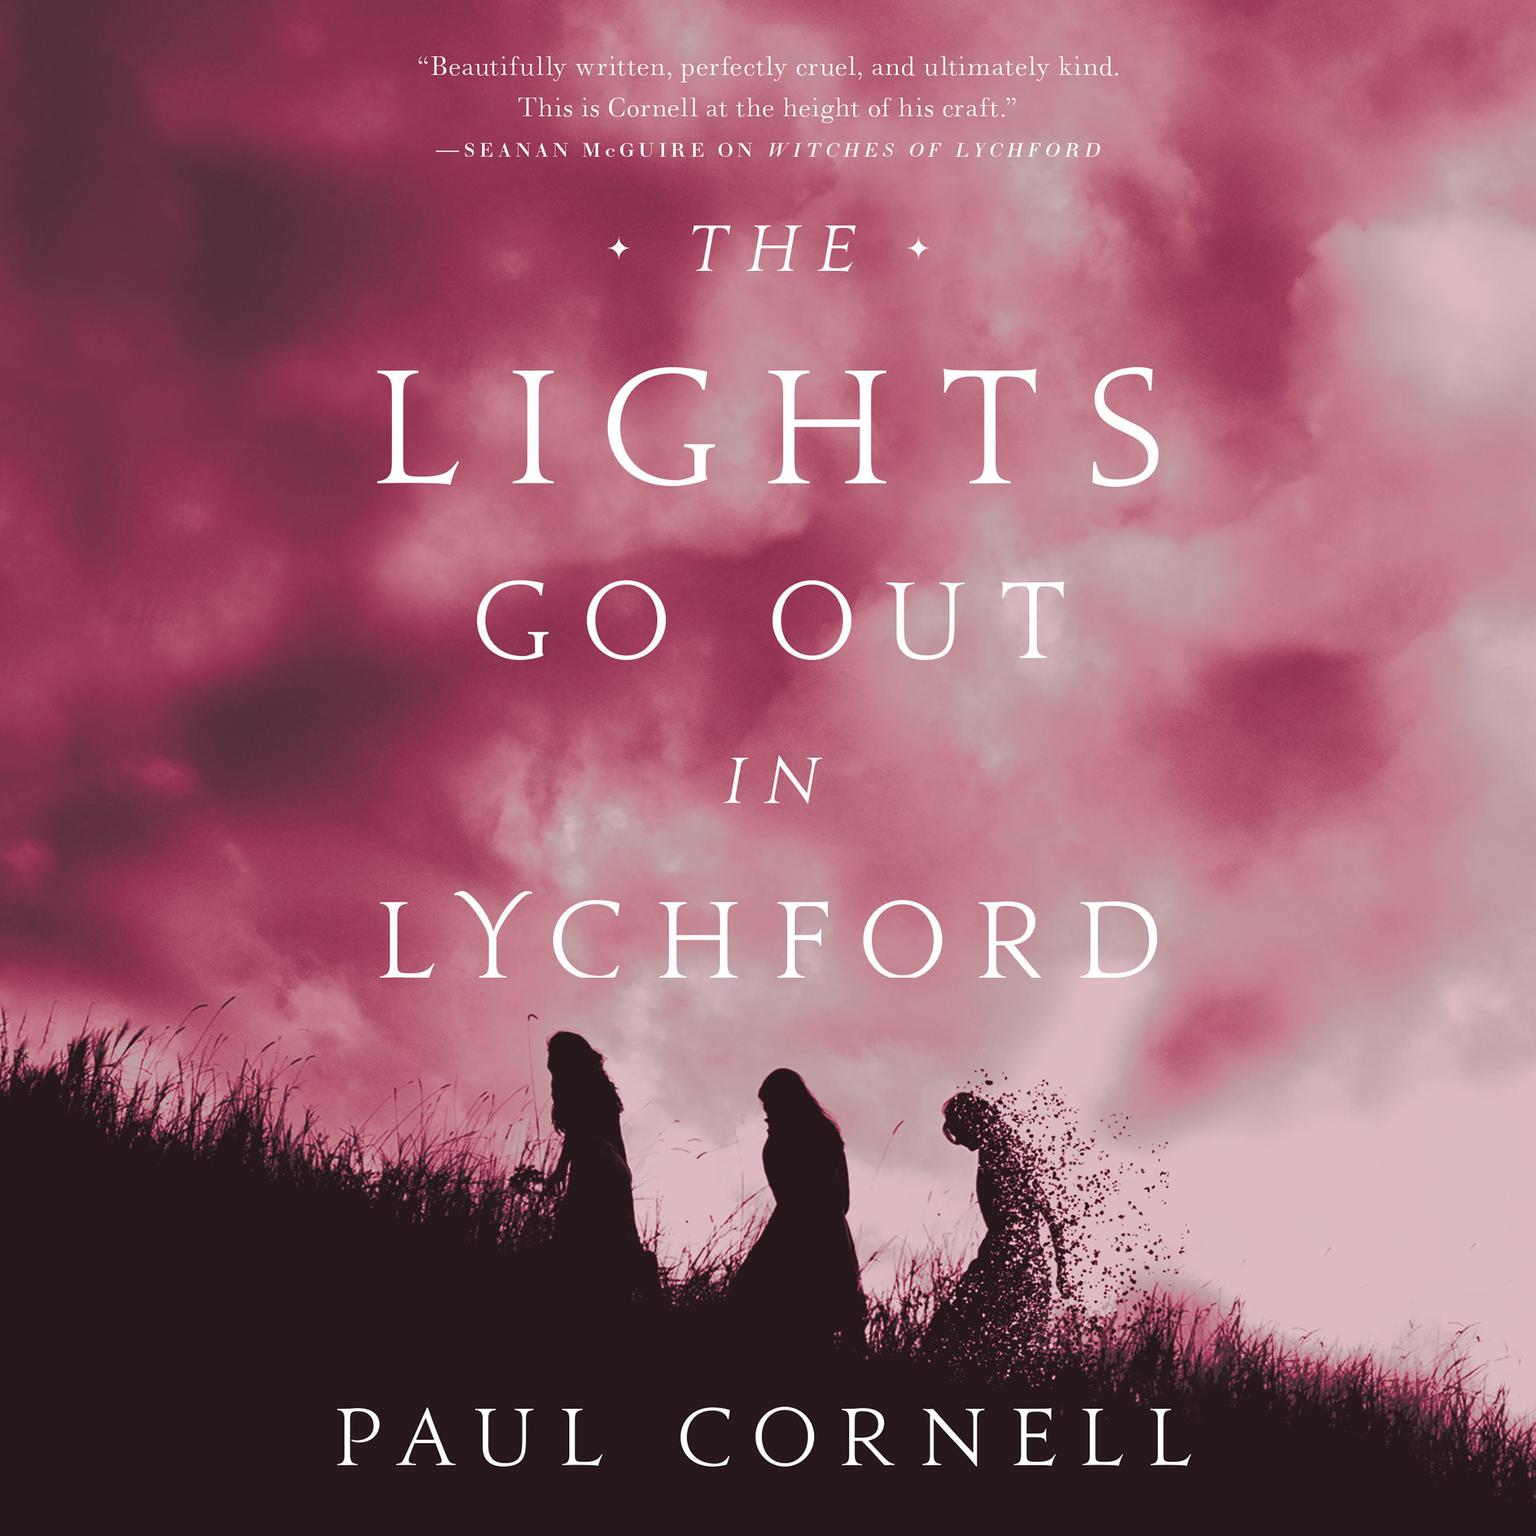 The Lights Go Out in Lychford Audiobook, by Paul Cornell